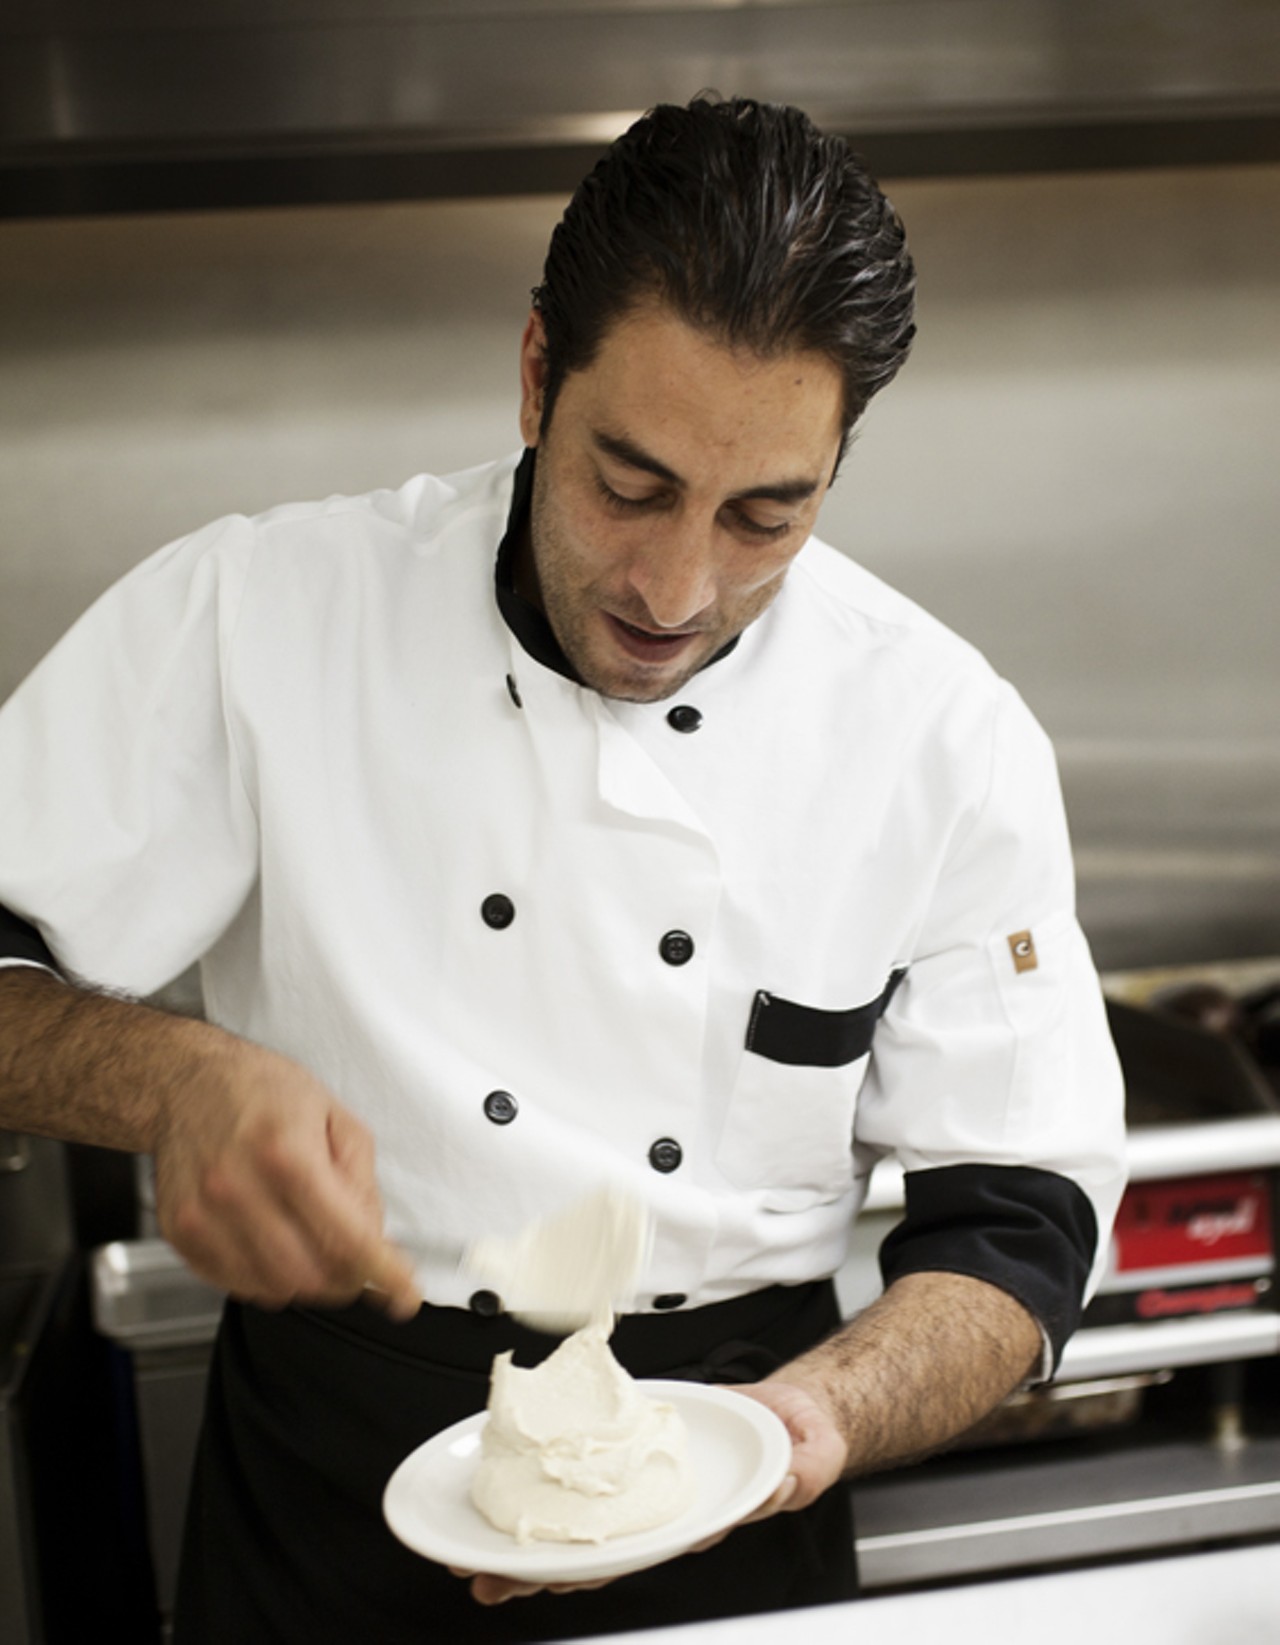 Chef Wasam Hamed in the kitchen at Layla, plating the hummus.